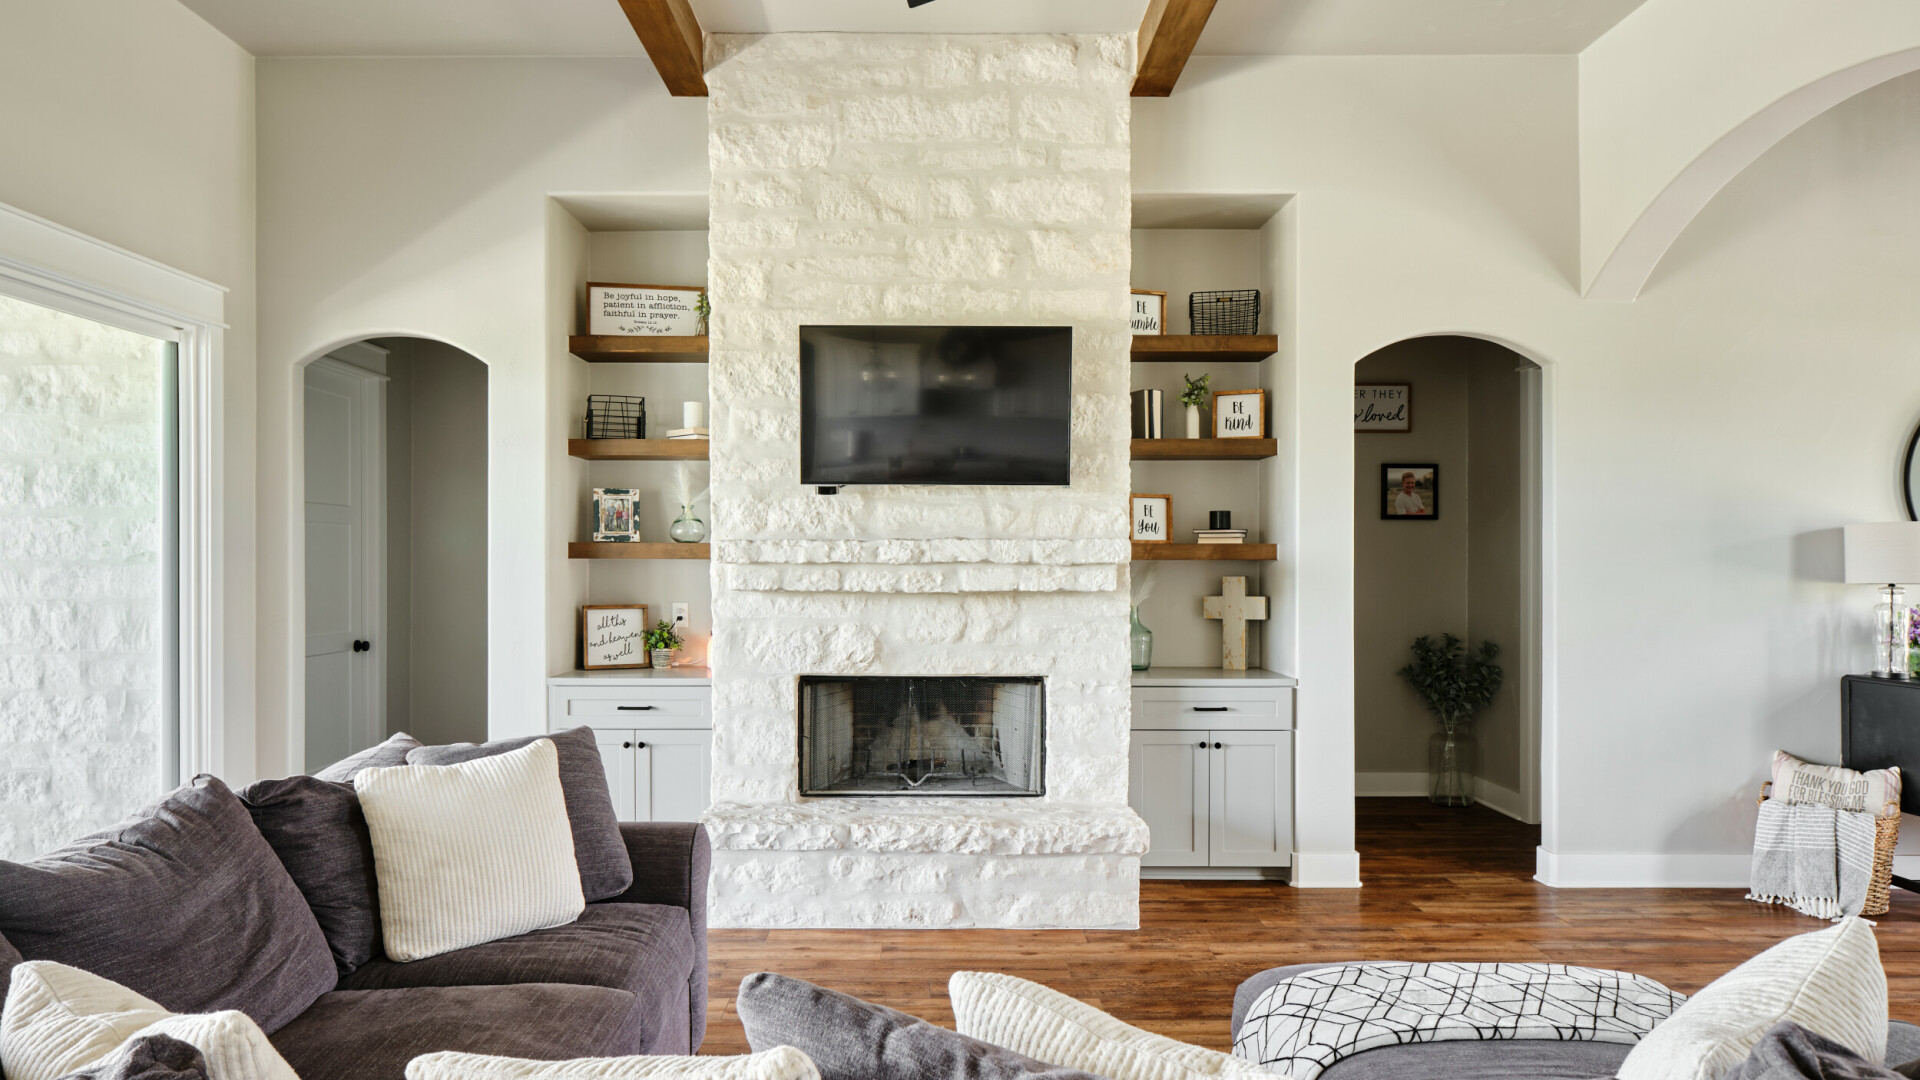 Cozy living room featuring a white brick fireplace and exposed wood beams, Lake LBJ TX